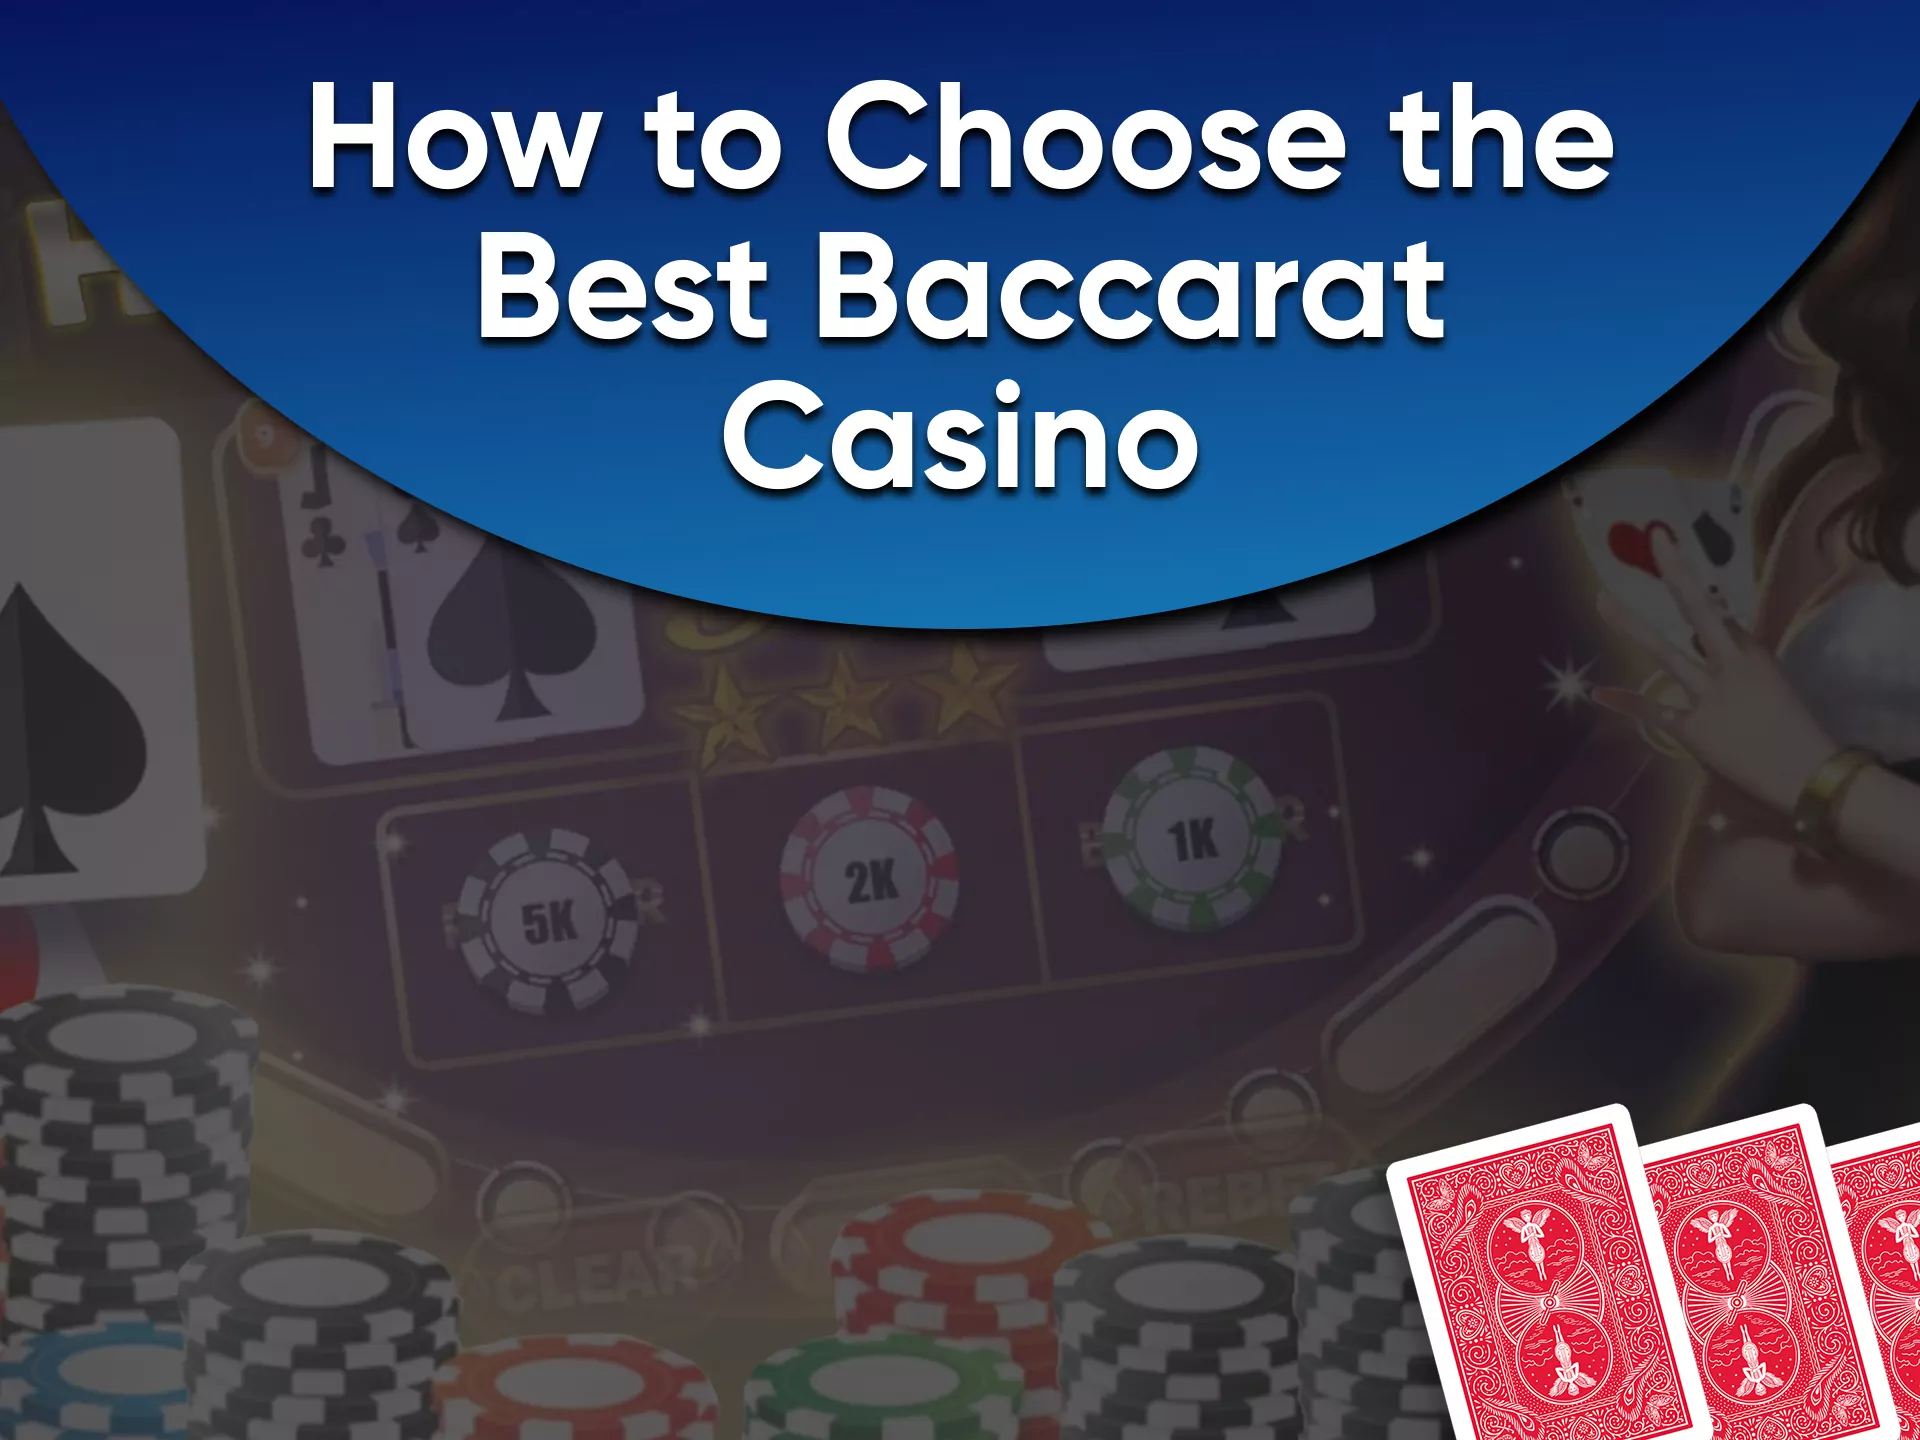 Choose a trusted service to play Baccarat.